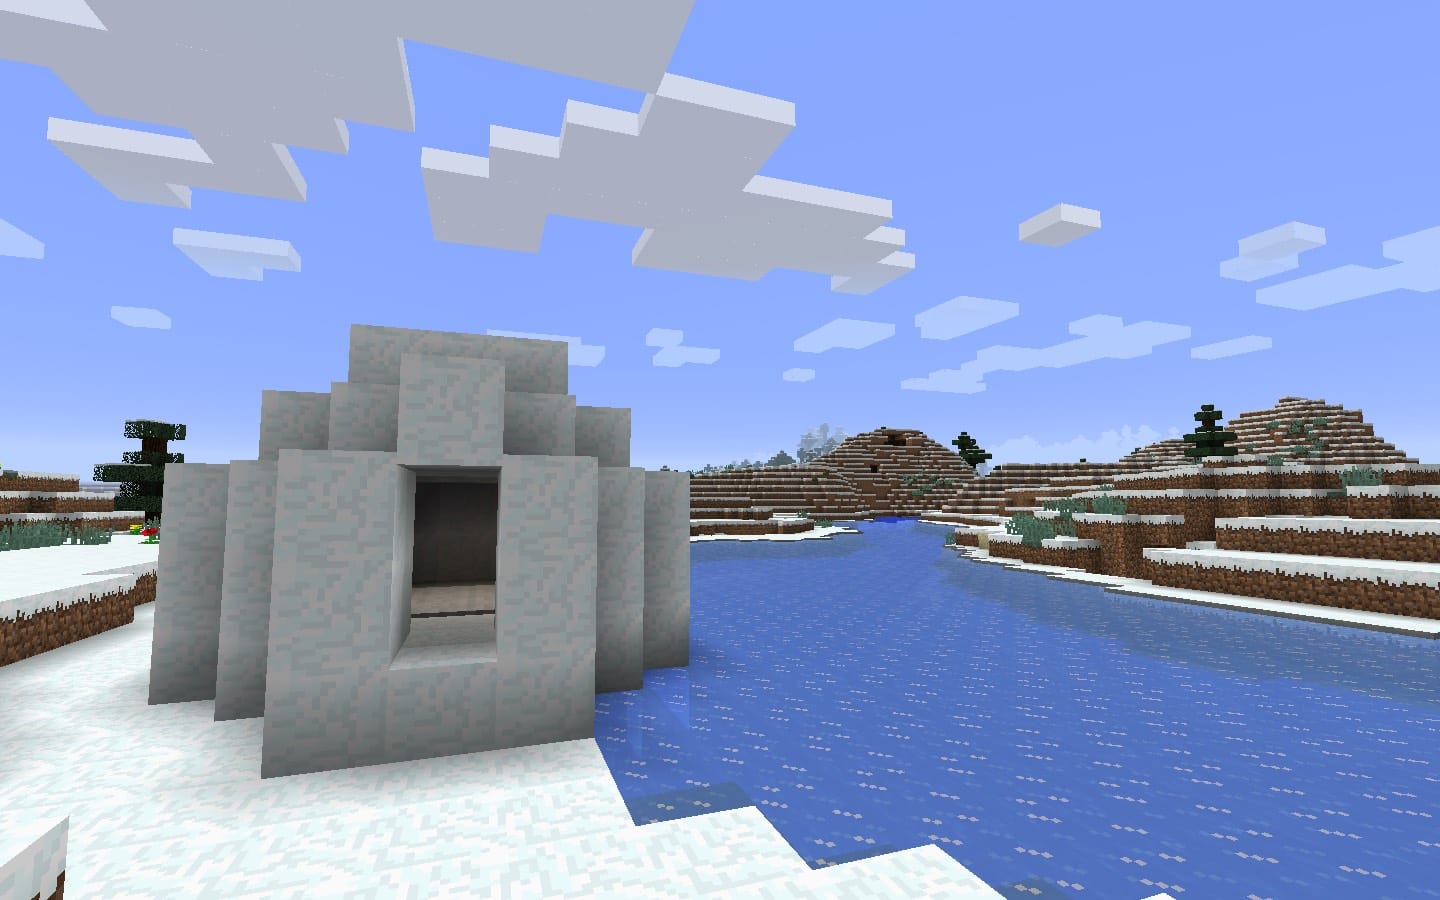 Igloo with Basement on Frozen River